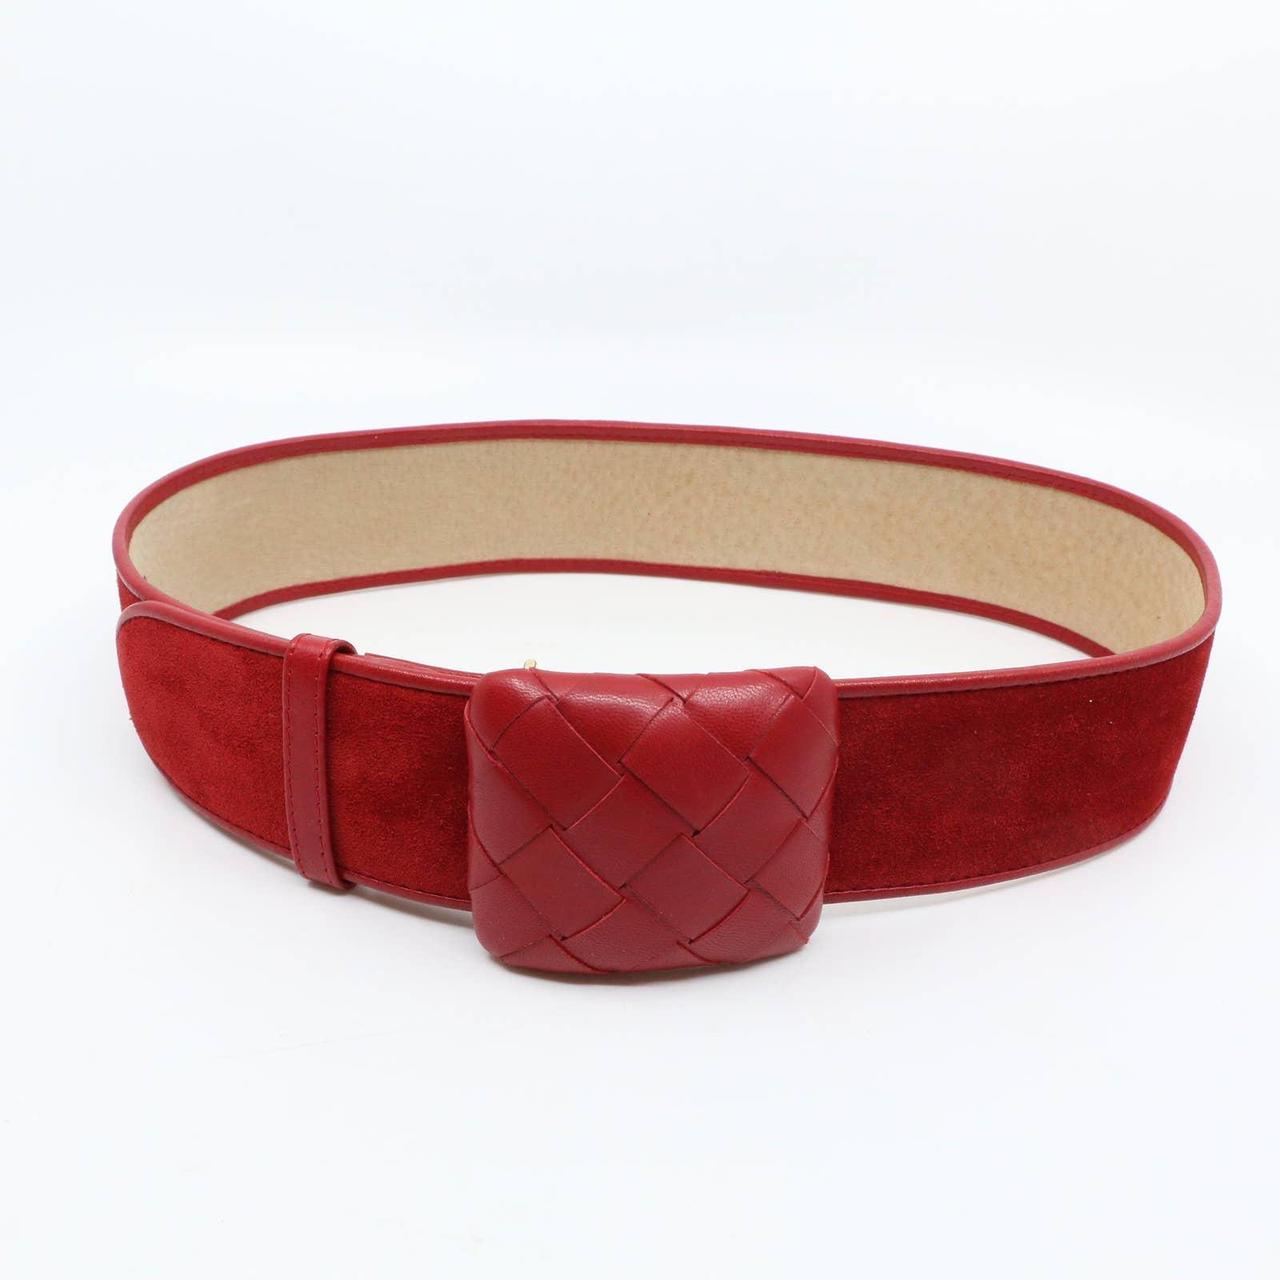 Product Image 2 - Beautifully crafted statement belt by